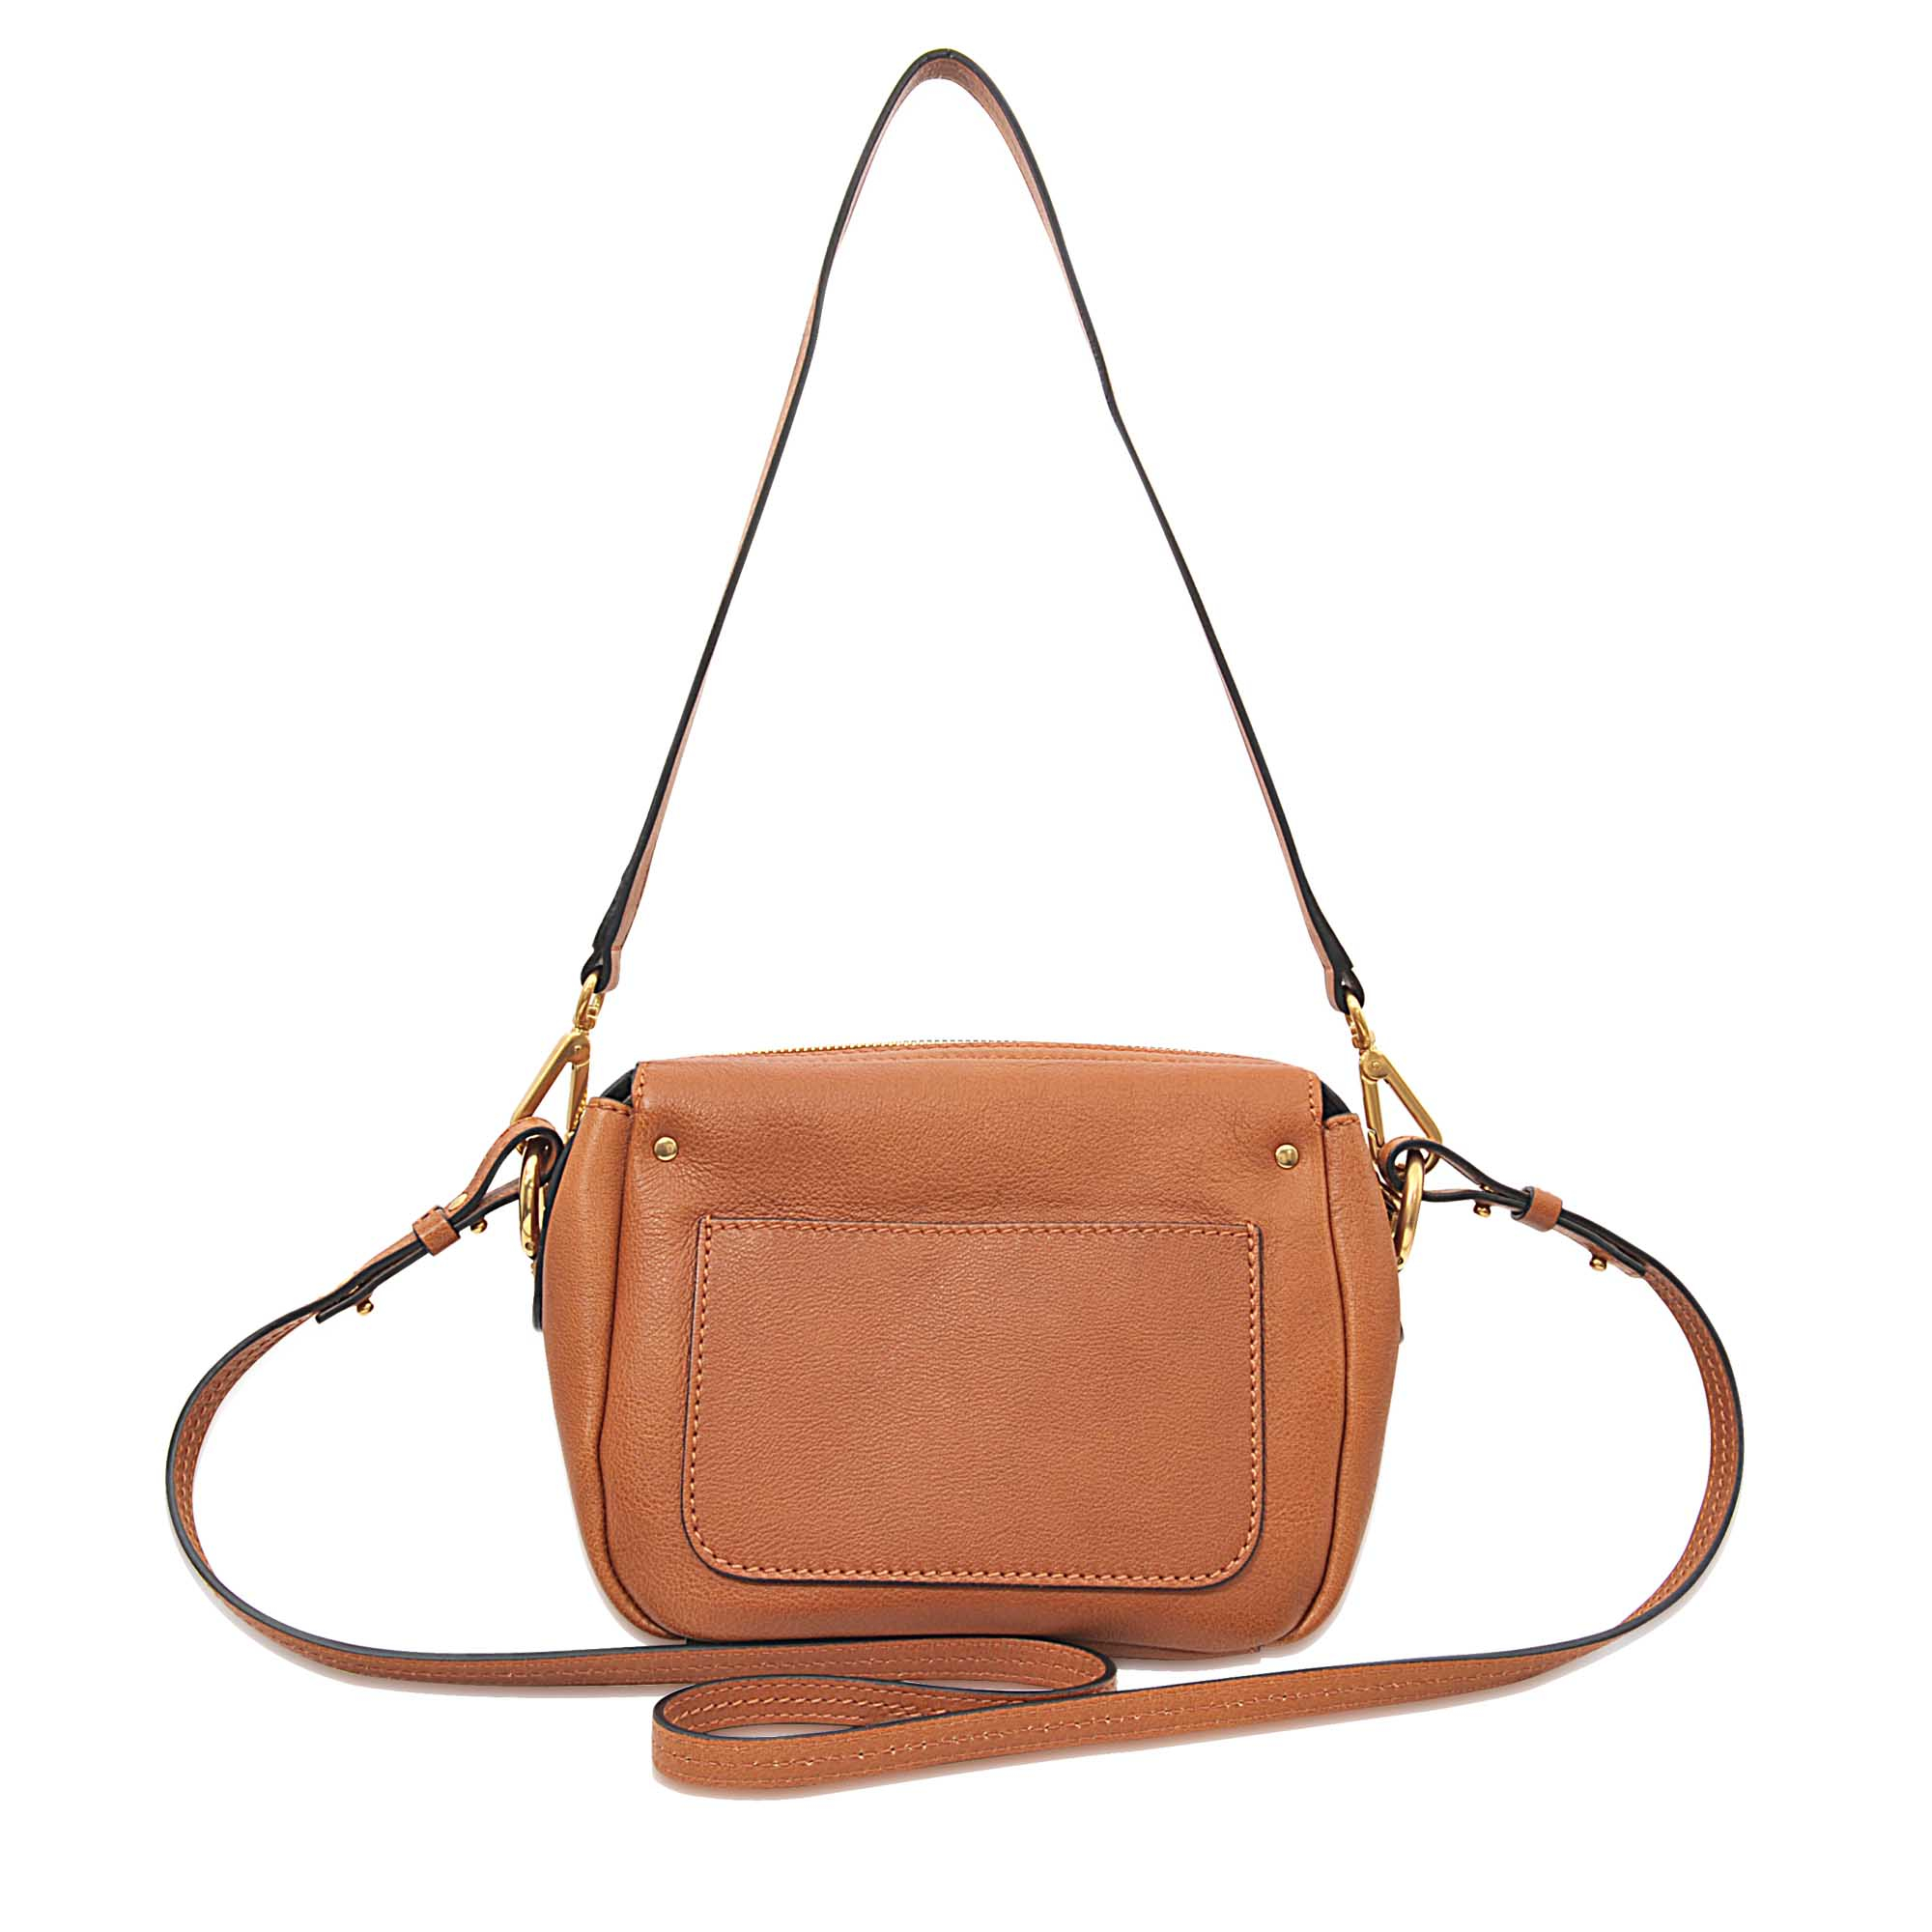 Chlo Indy Small Camera Bag in Brown | Lyst  